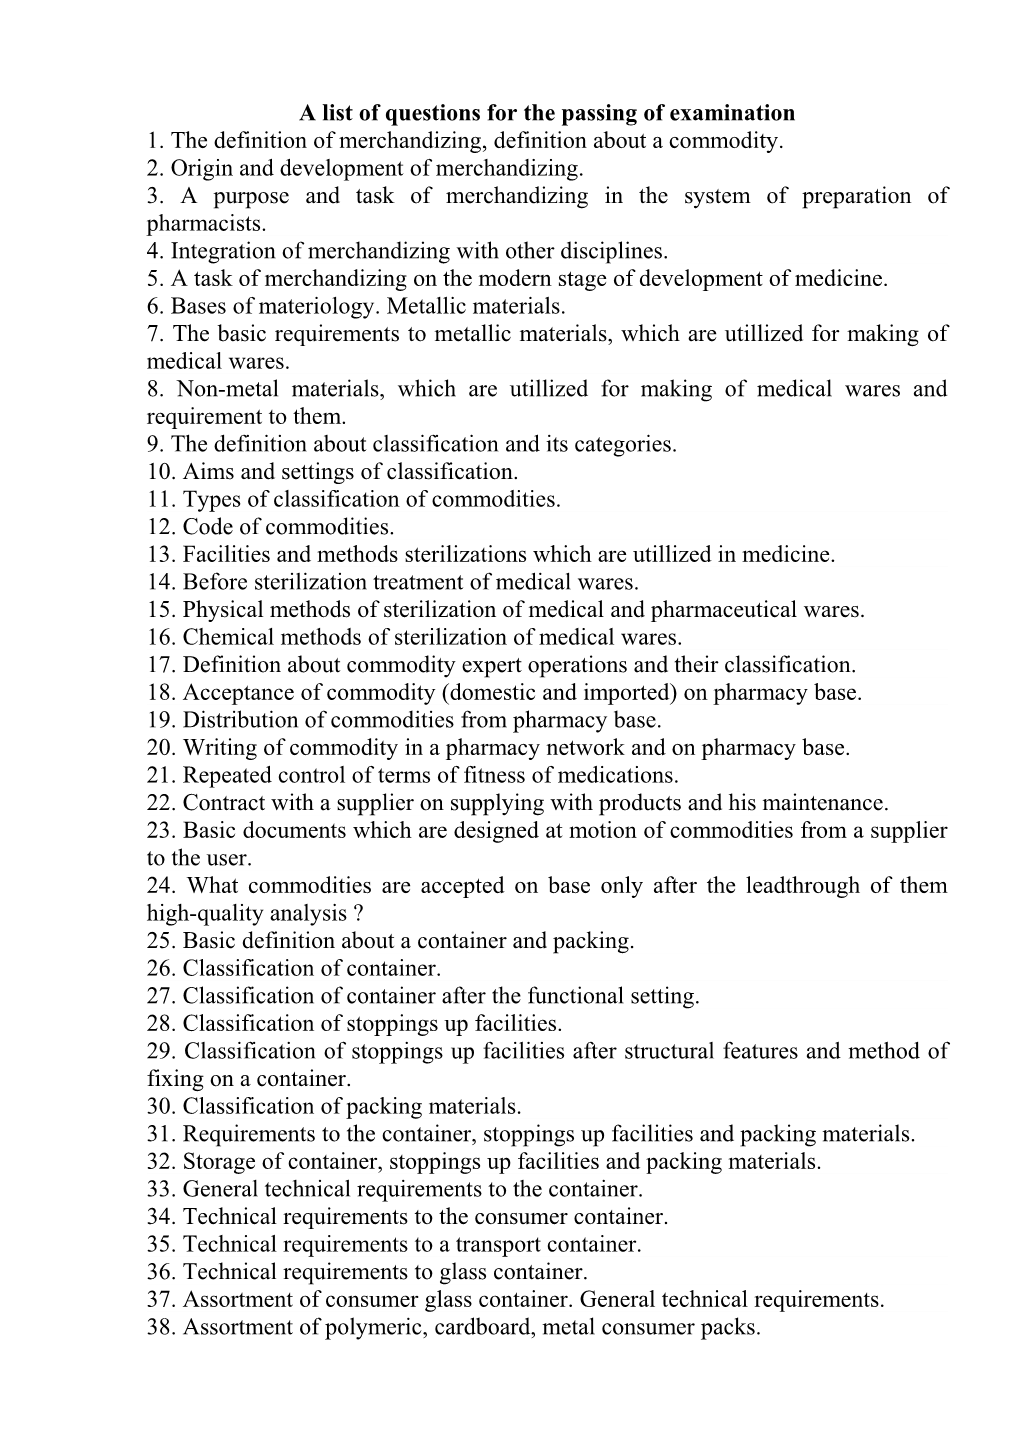 A List of Questions for the Passing of Examination